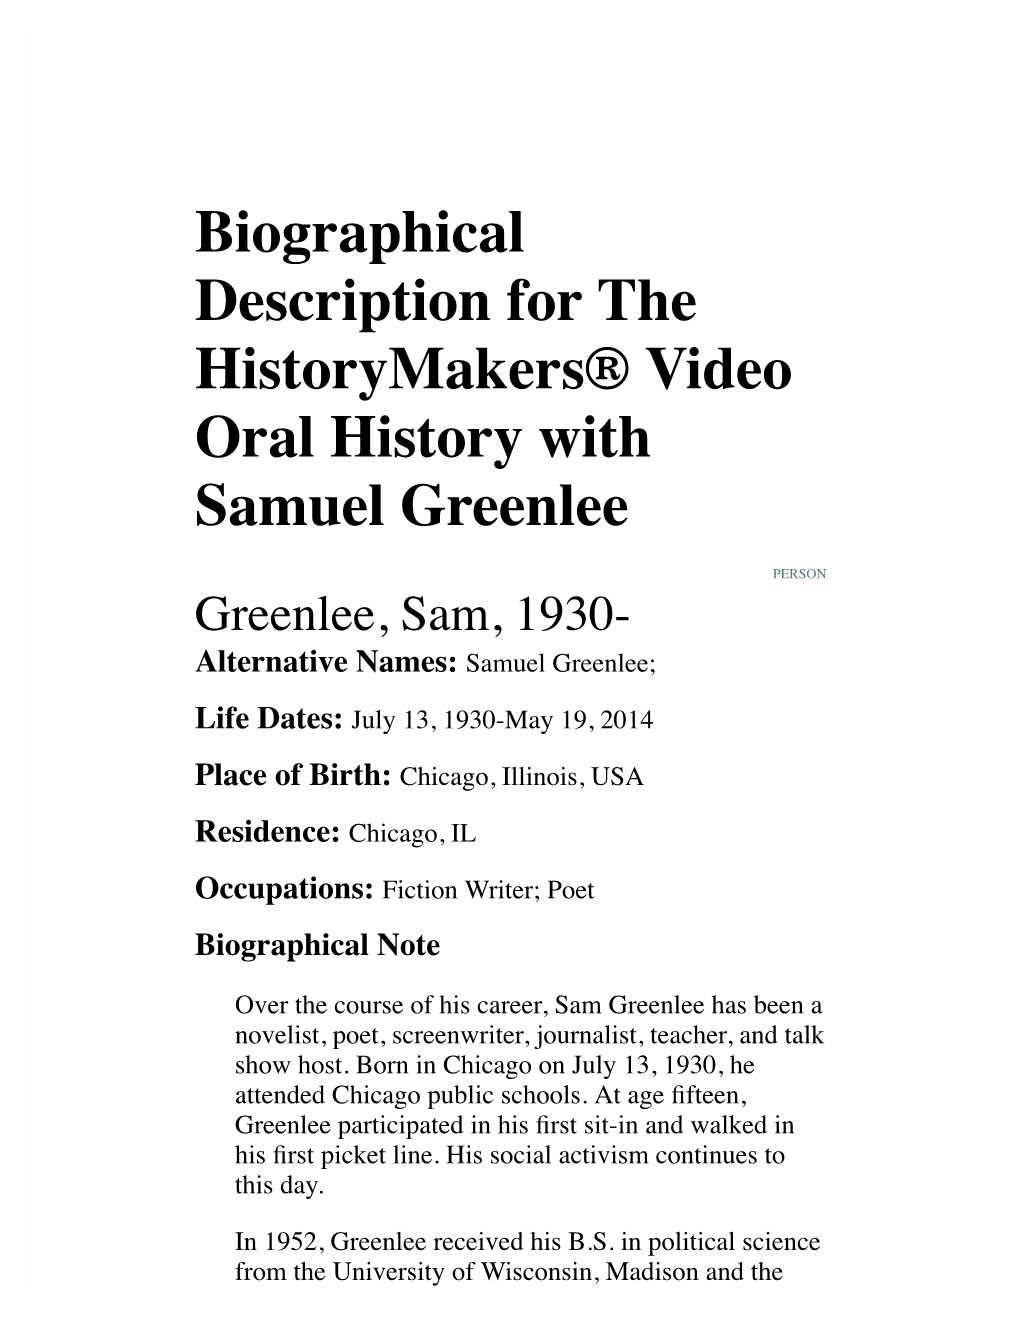 Biographical Description for the Historymakers® Video Oral History with Samuel Greenlee